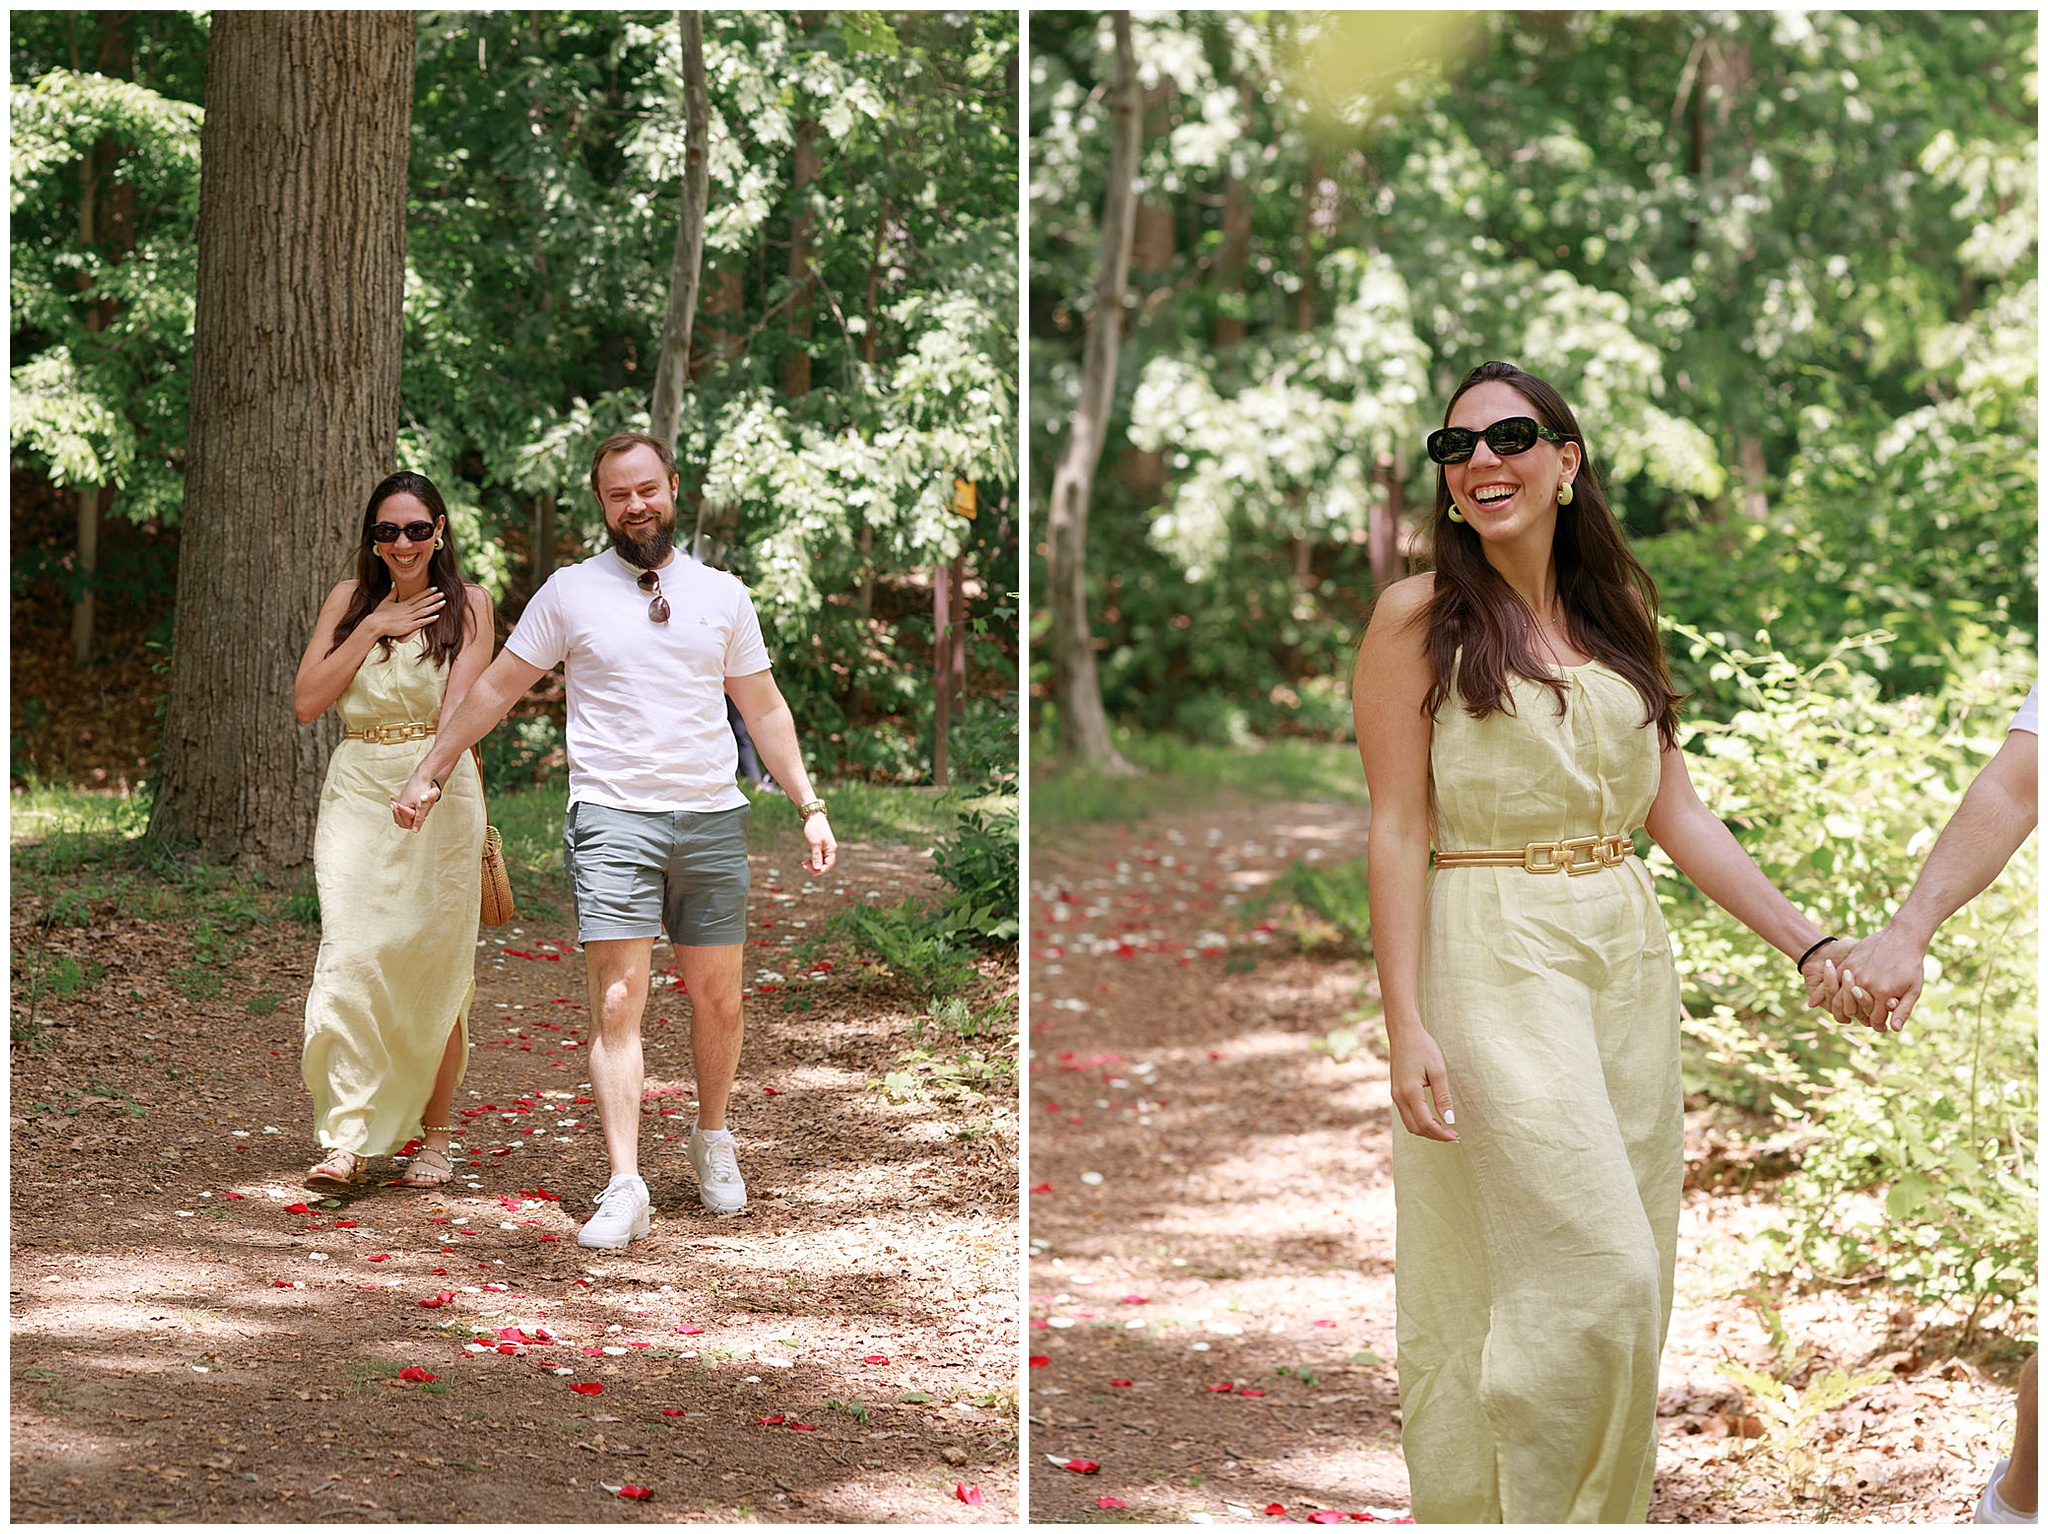 A man lead his girlfriend through a park path covered in rose petals to propose dc engagement photographer